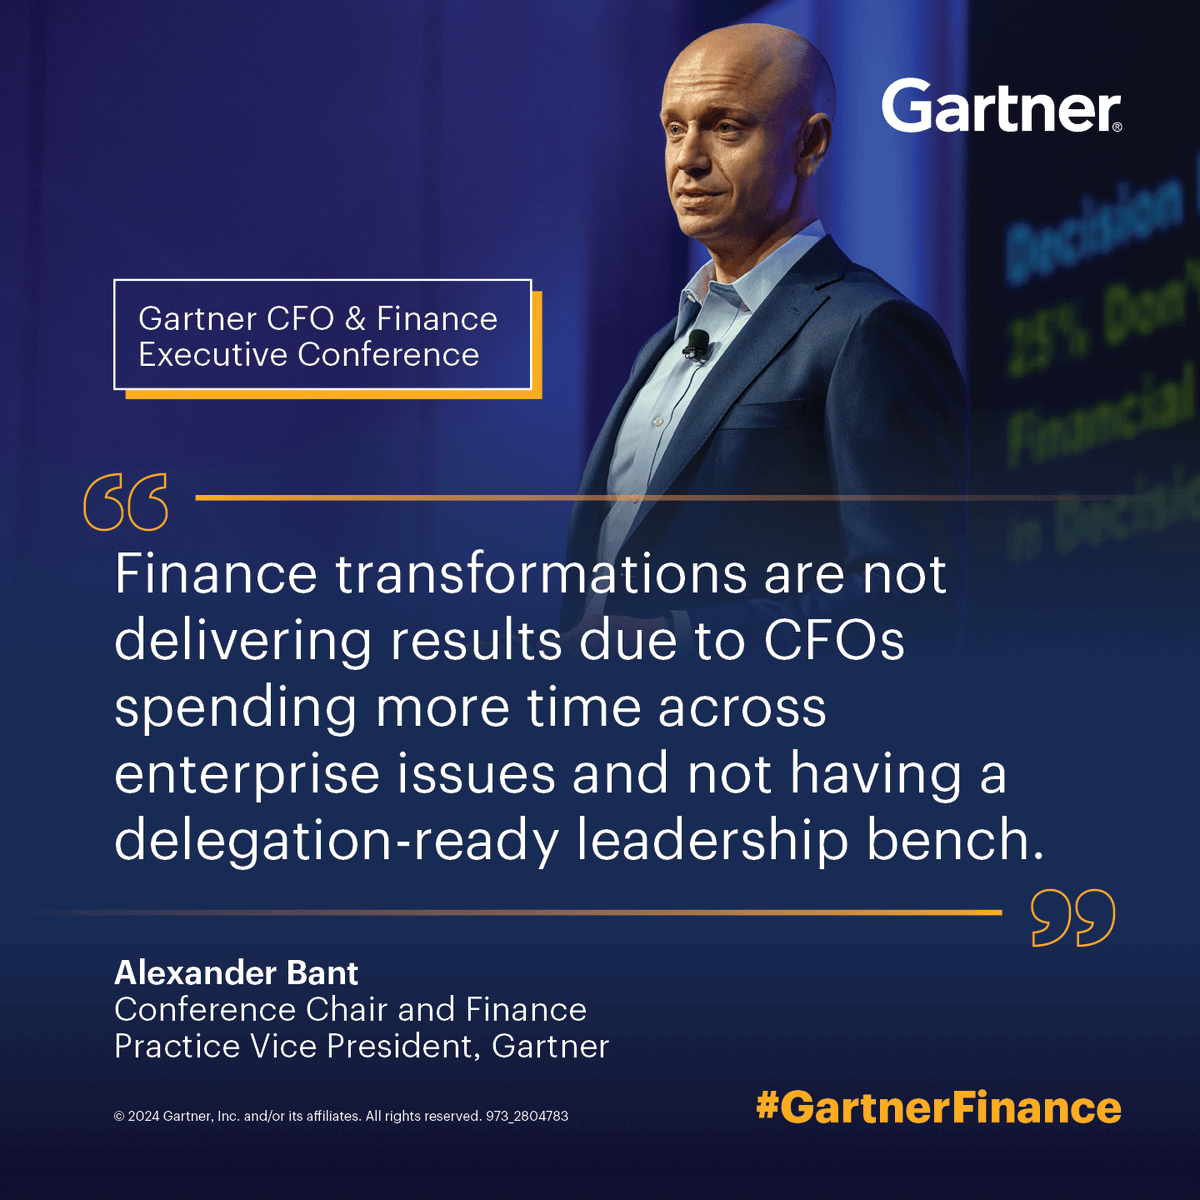 Join us at #GartnerFinance to see how autonomous #finance drives transformation and unlocks enterprise value. Explore this year’s #FinanceTransformation sessions now: gtnr.it/3PWV52I